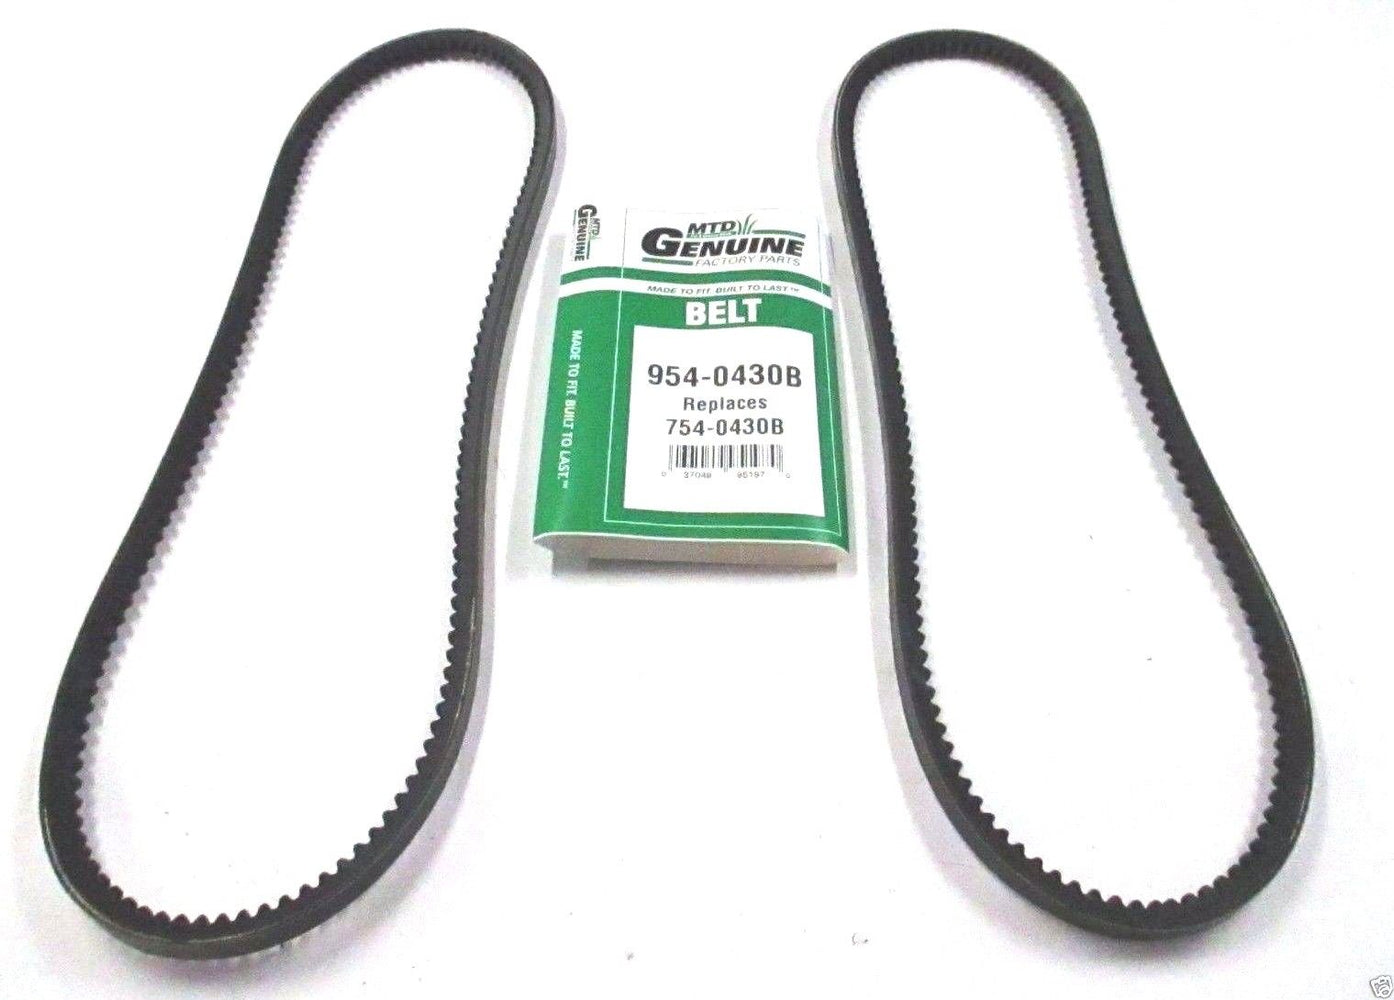 Genuine MTD 954-0430B Set of 2 Cogged Auger Belts Replaces 754-0430B OEM